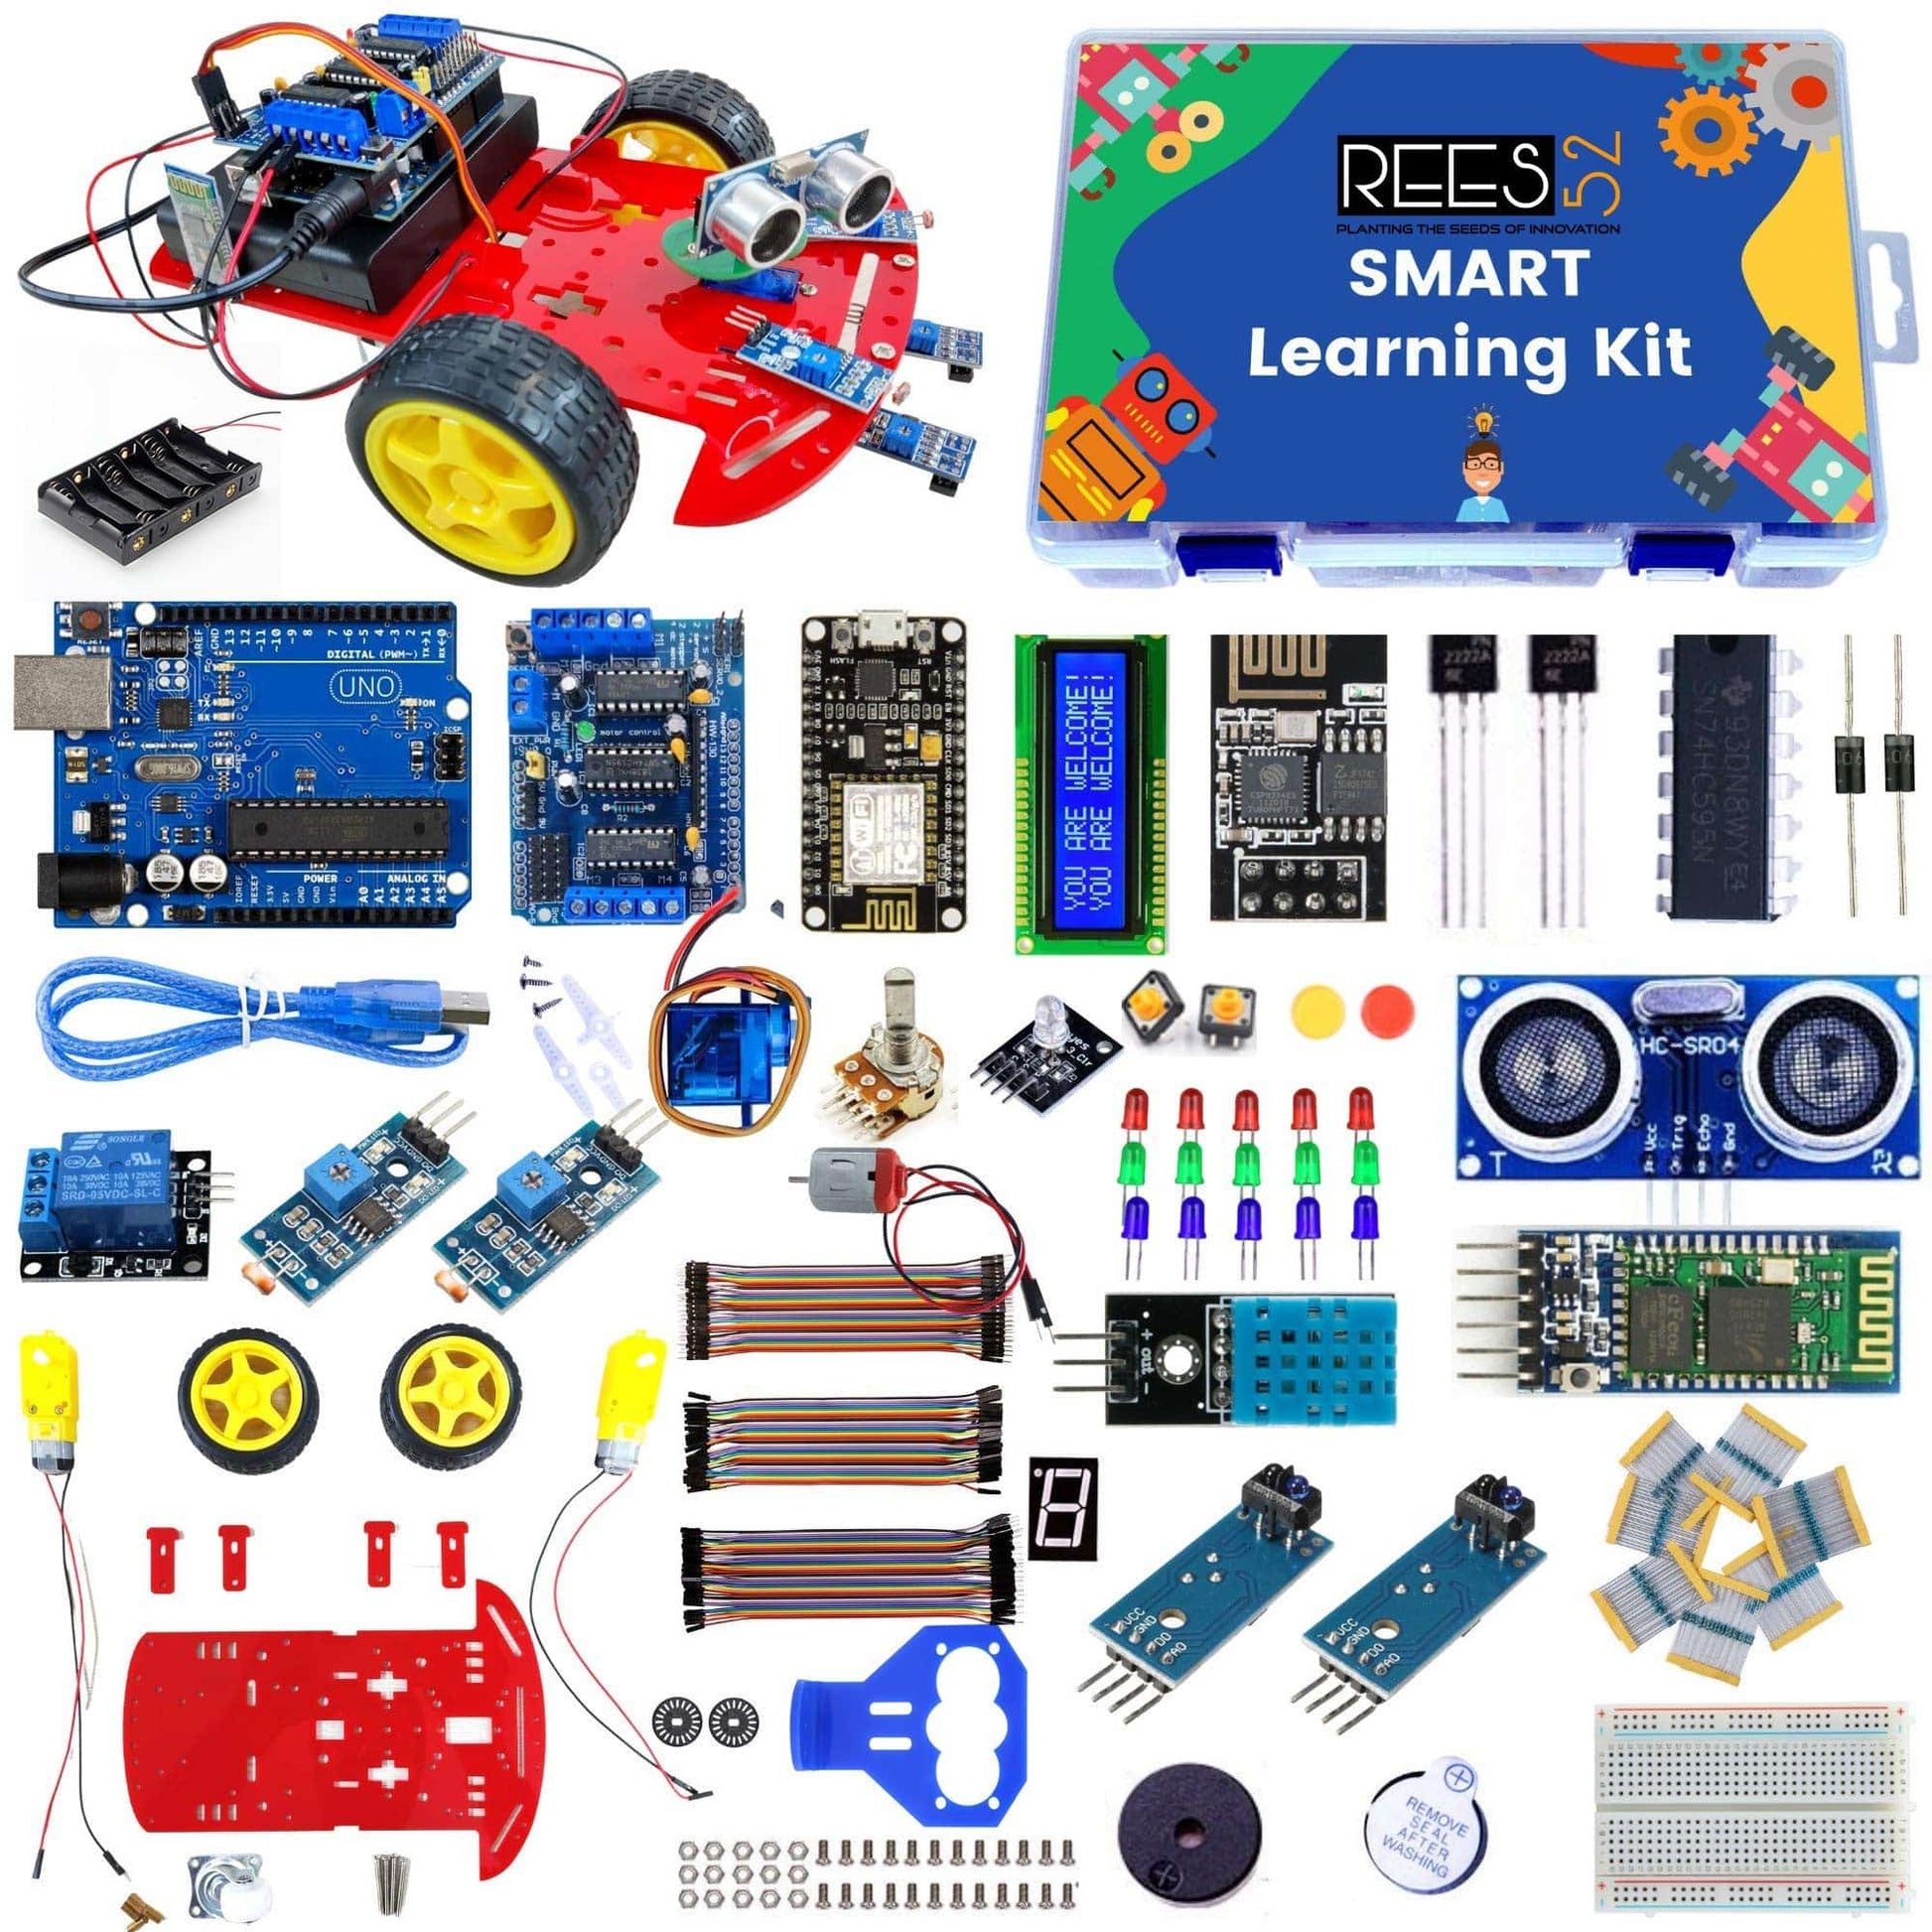 Smart Learning Robotics IOT Kit for Starters to Advance level users - B08R72C98_T - REES52